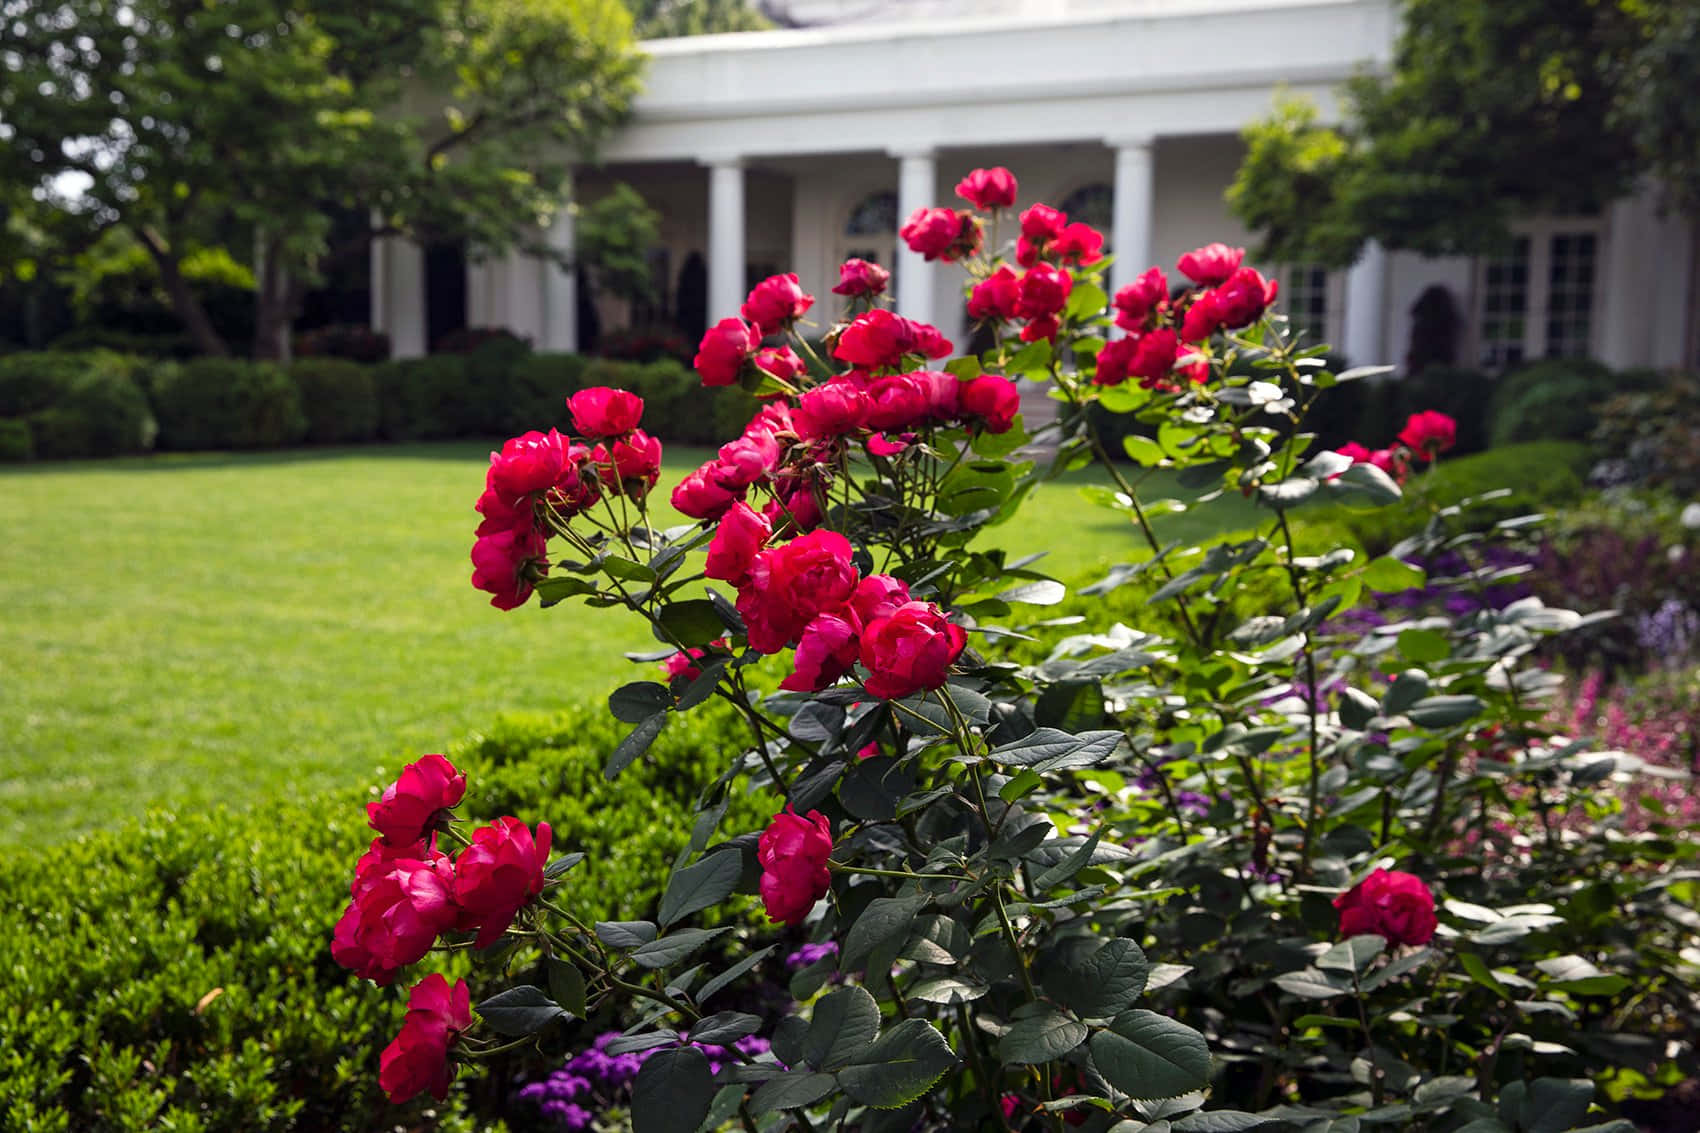 Take a break from the hustle and bustle of the nation's capital and relax in the tranquil White House Rose Garden.